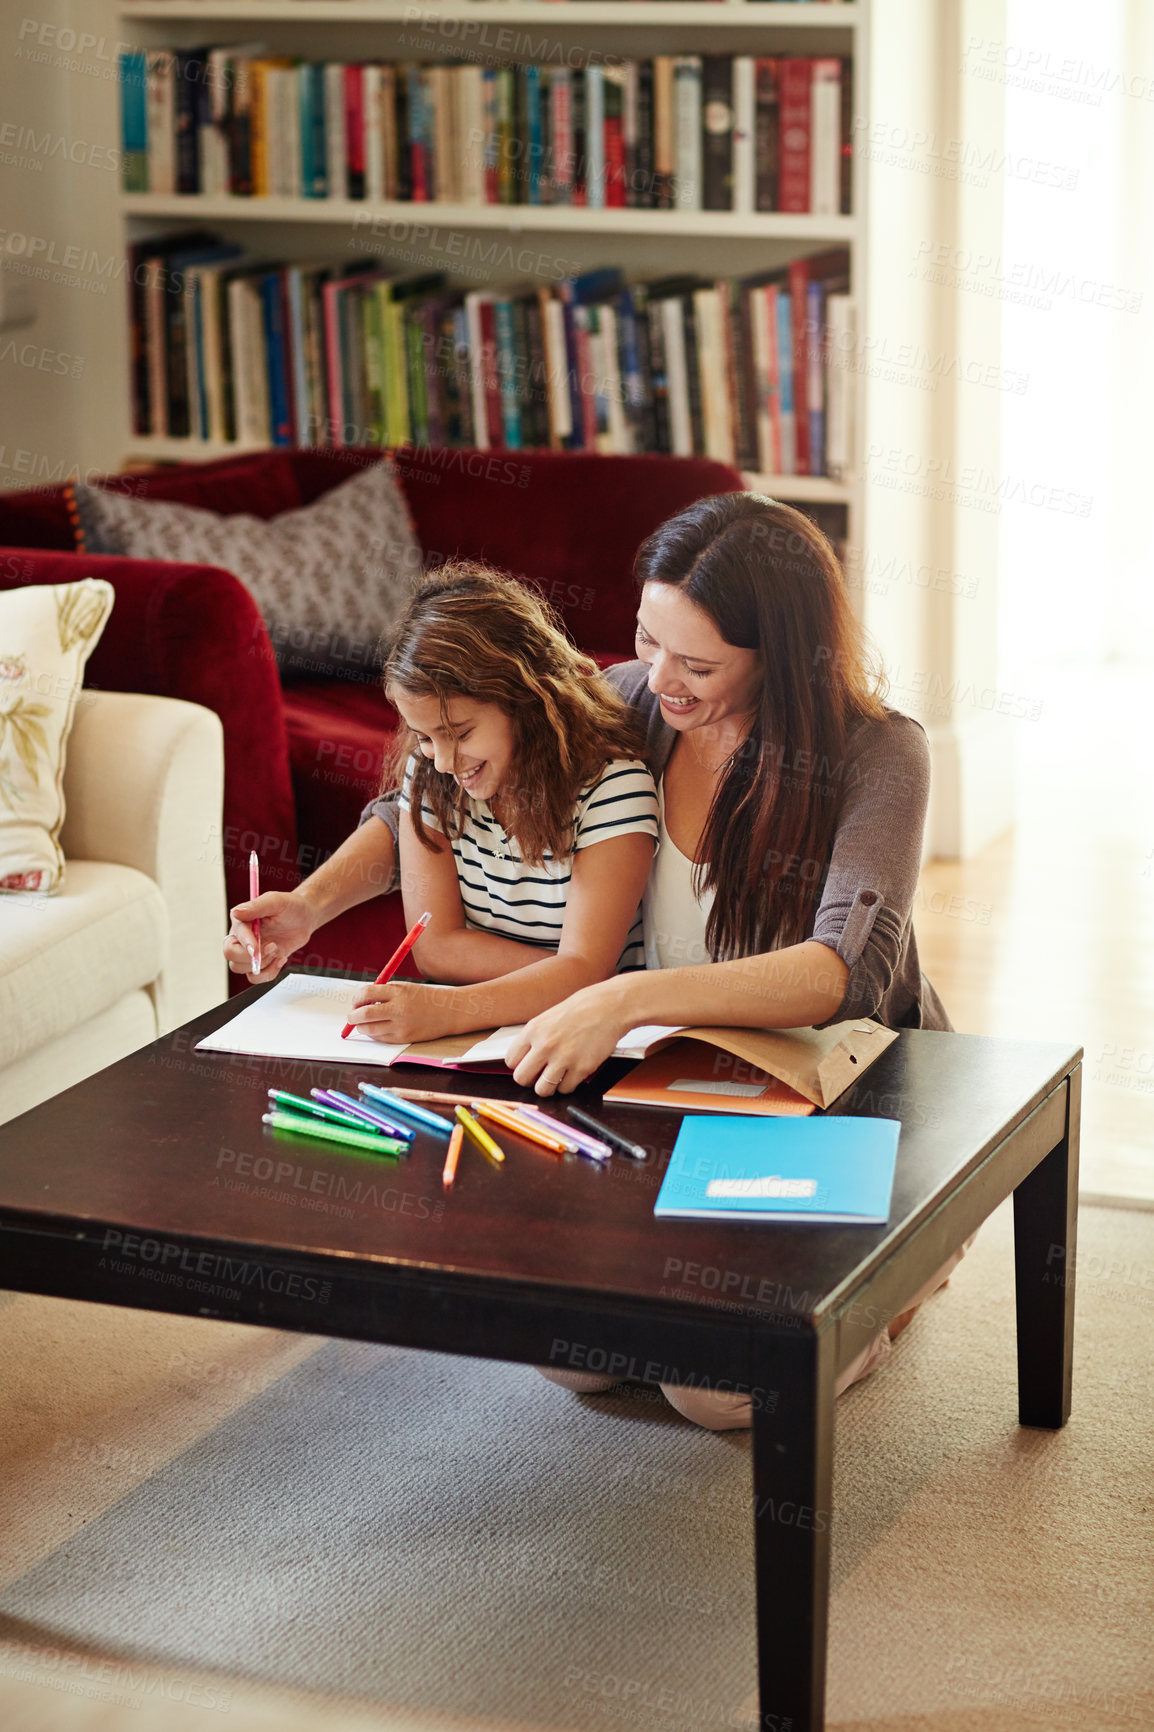 Buy stock photo Shot of a beautiful mother helping her adorable daughter with her homework at home